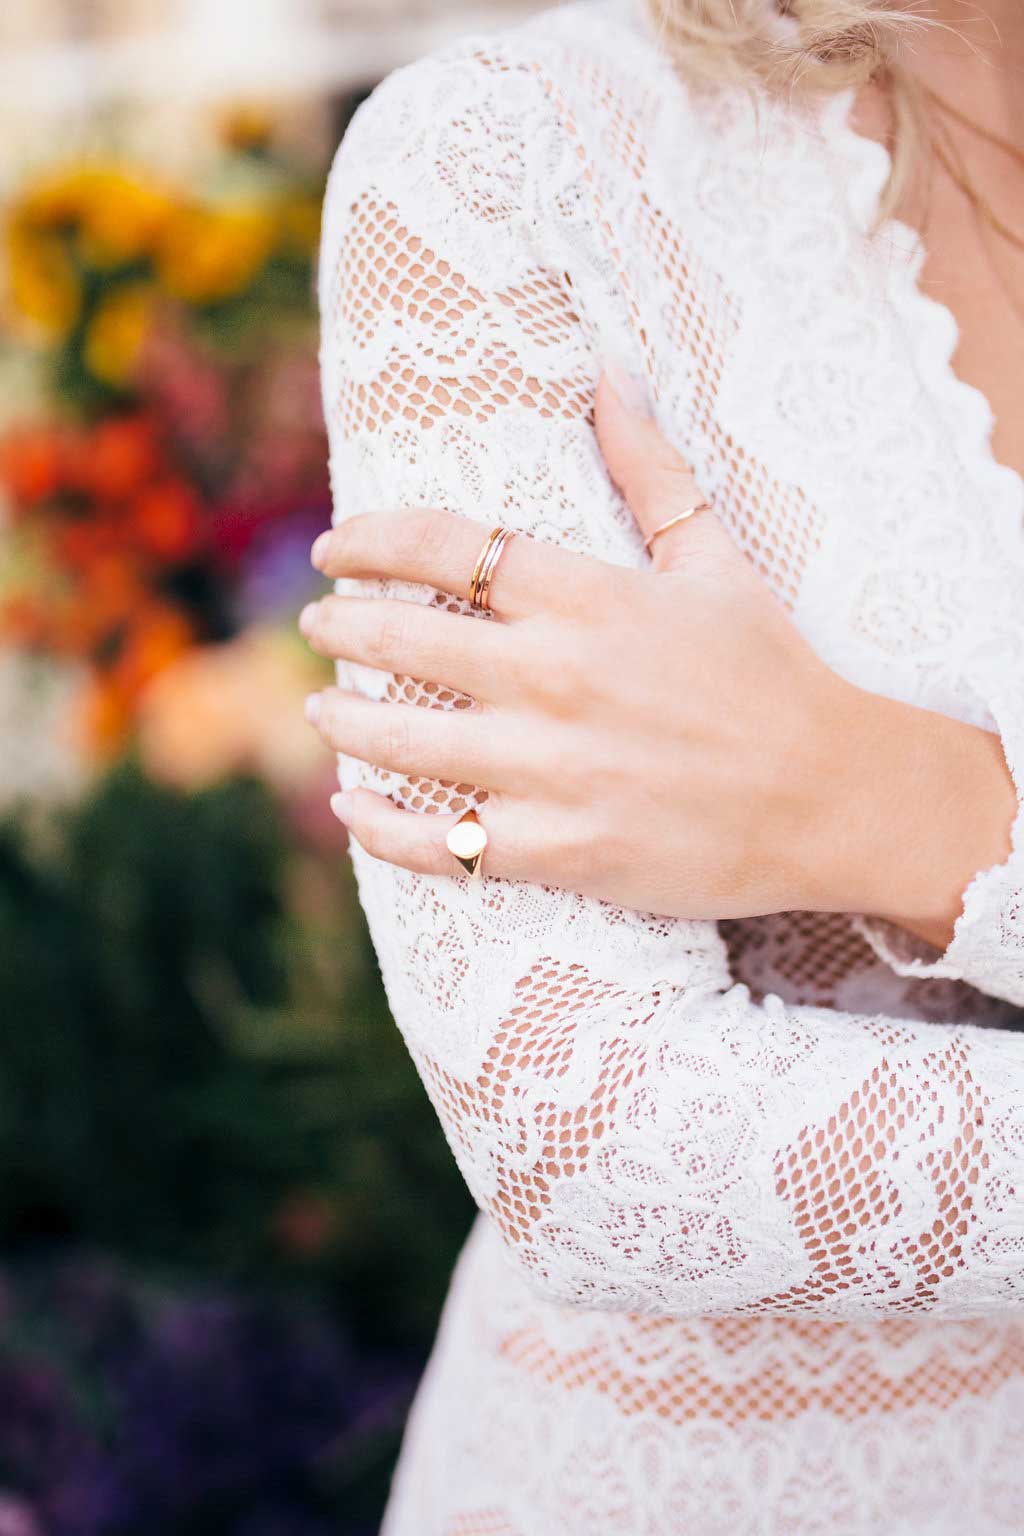 Woman wearing white lace shirt with hand on arm wearing Katie Dean Jewelry Oval Signat Ring